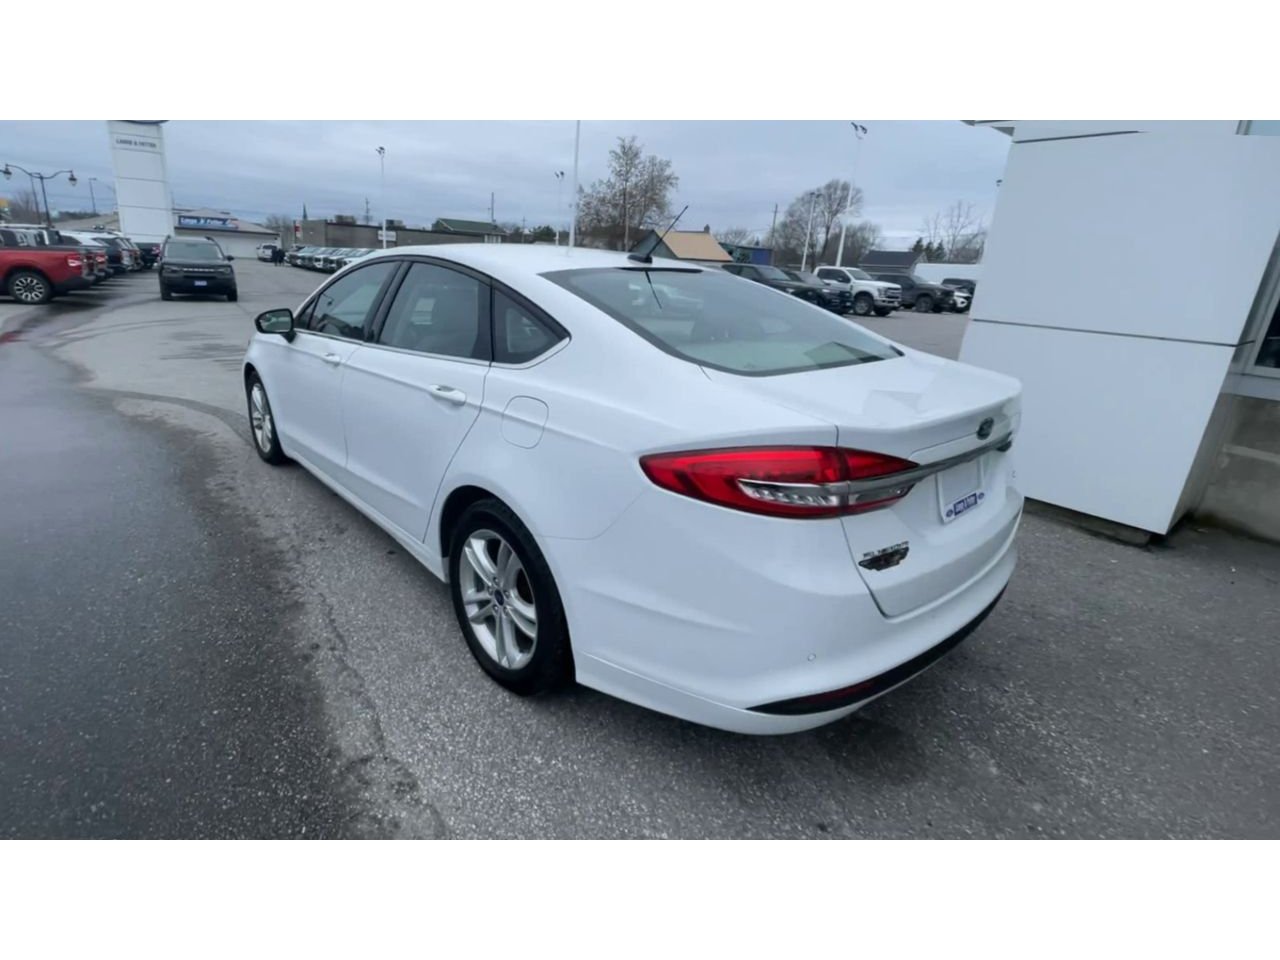 2018 Ford Fusion - P21087 Full Image 7